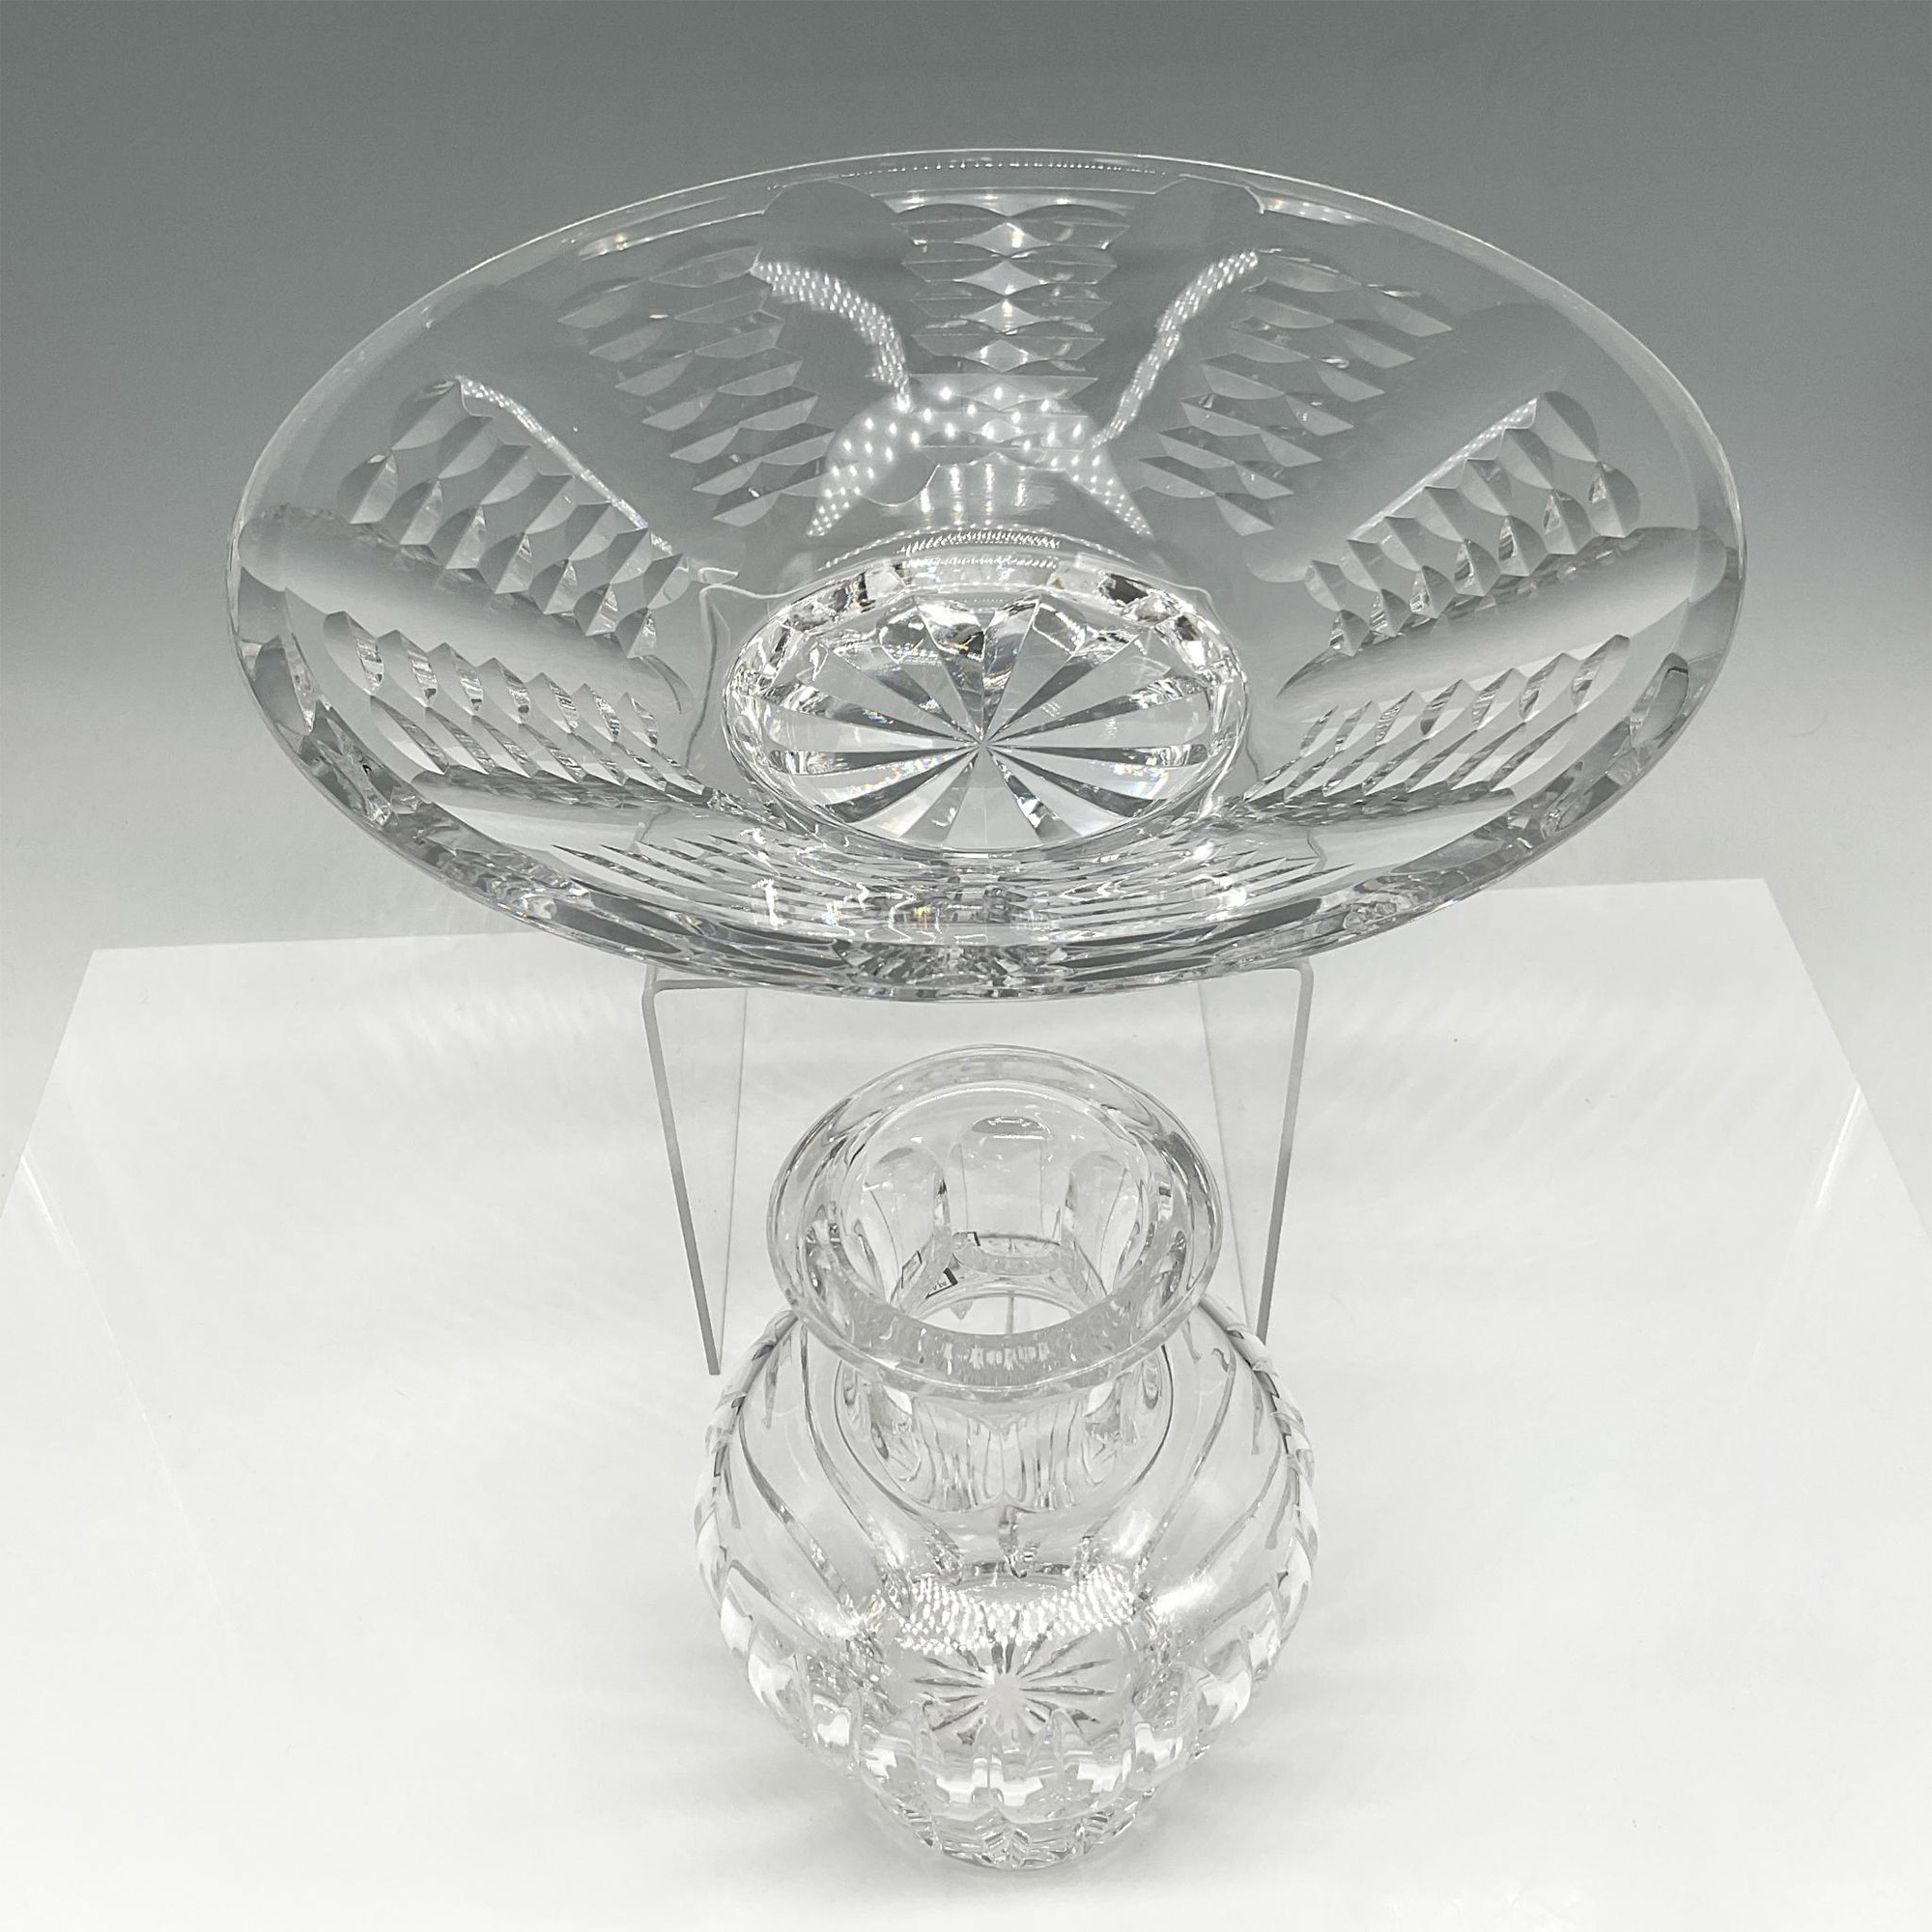 2pc Waterford Crystal Centerpiece Bowl & Vase - Image 2 of 3